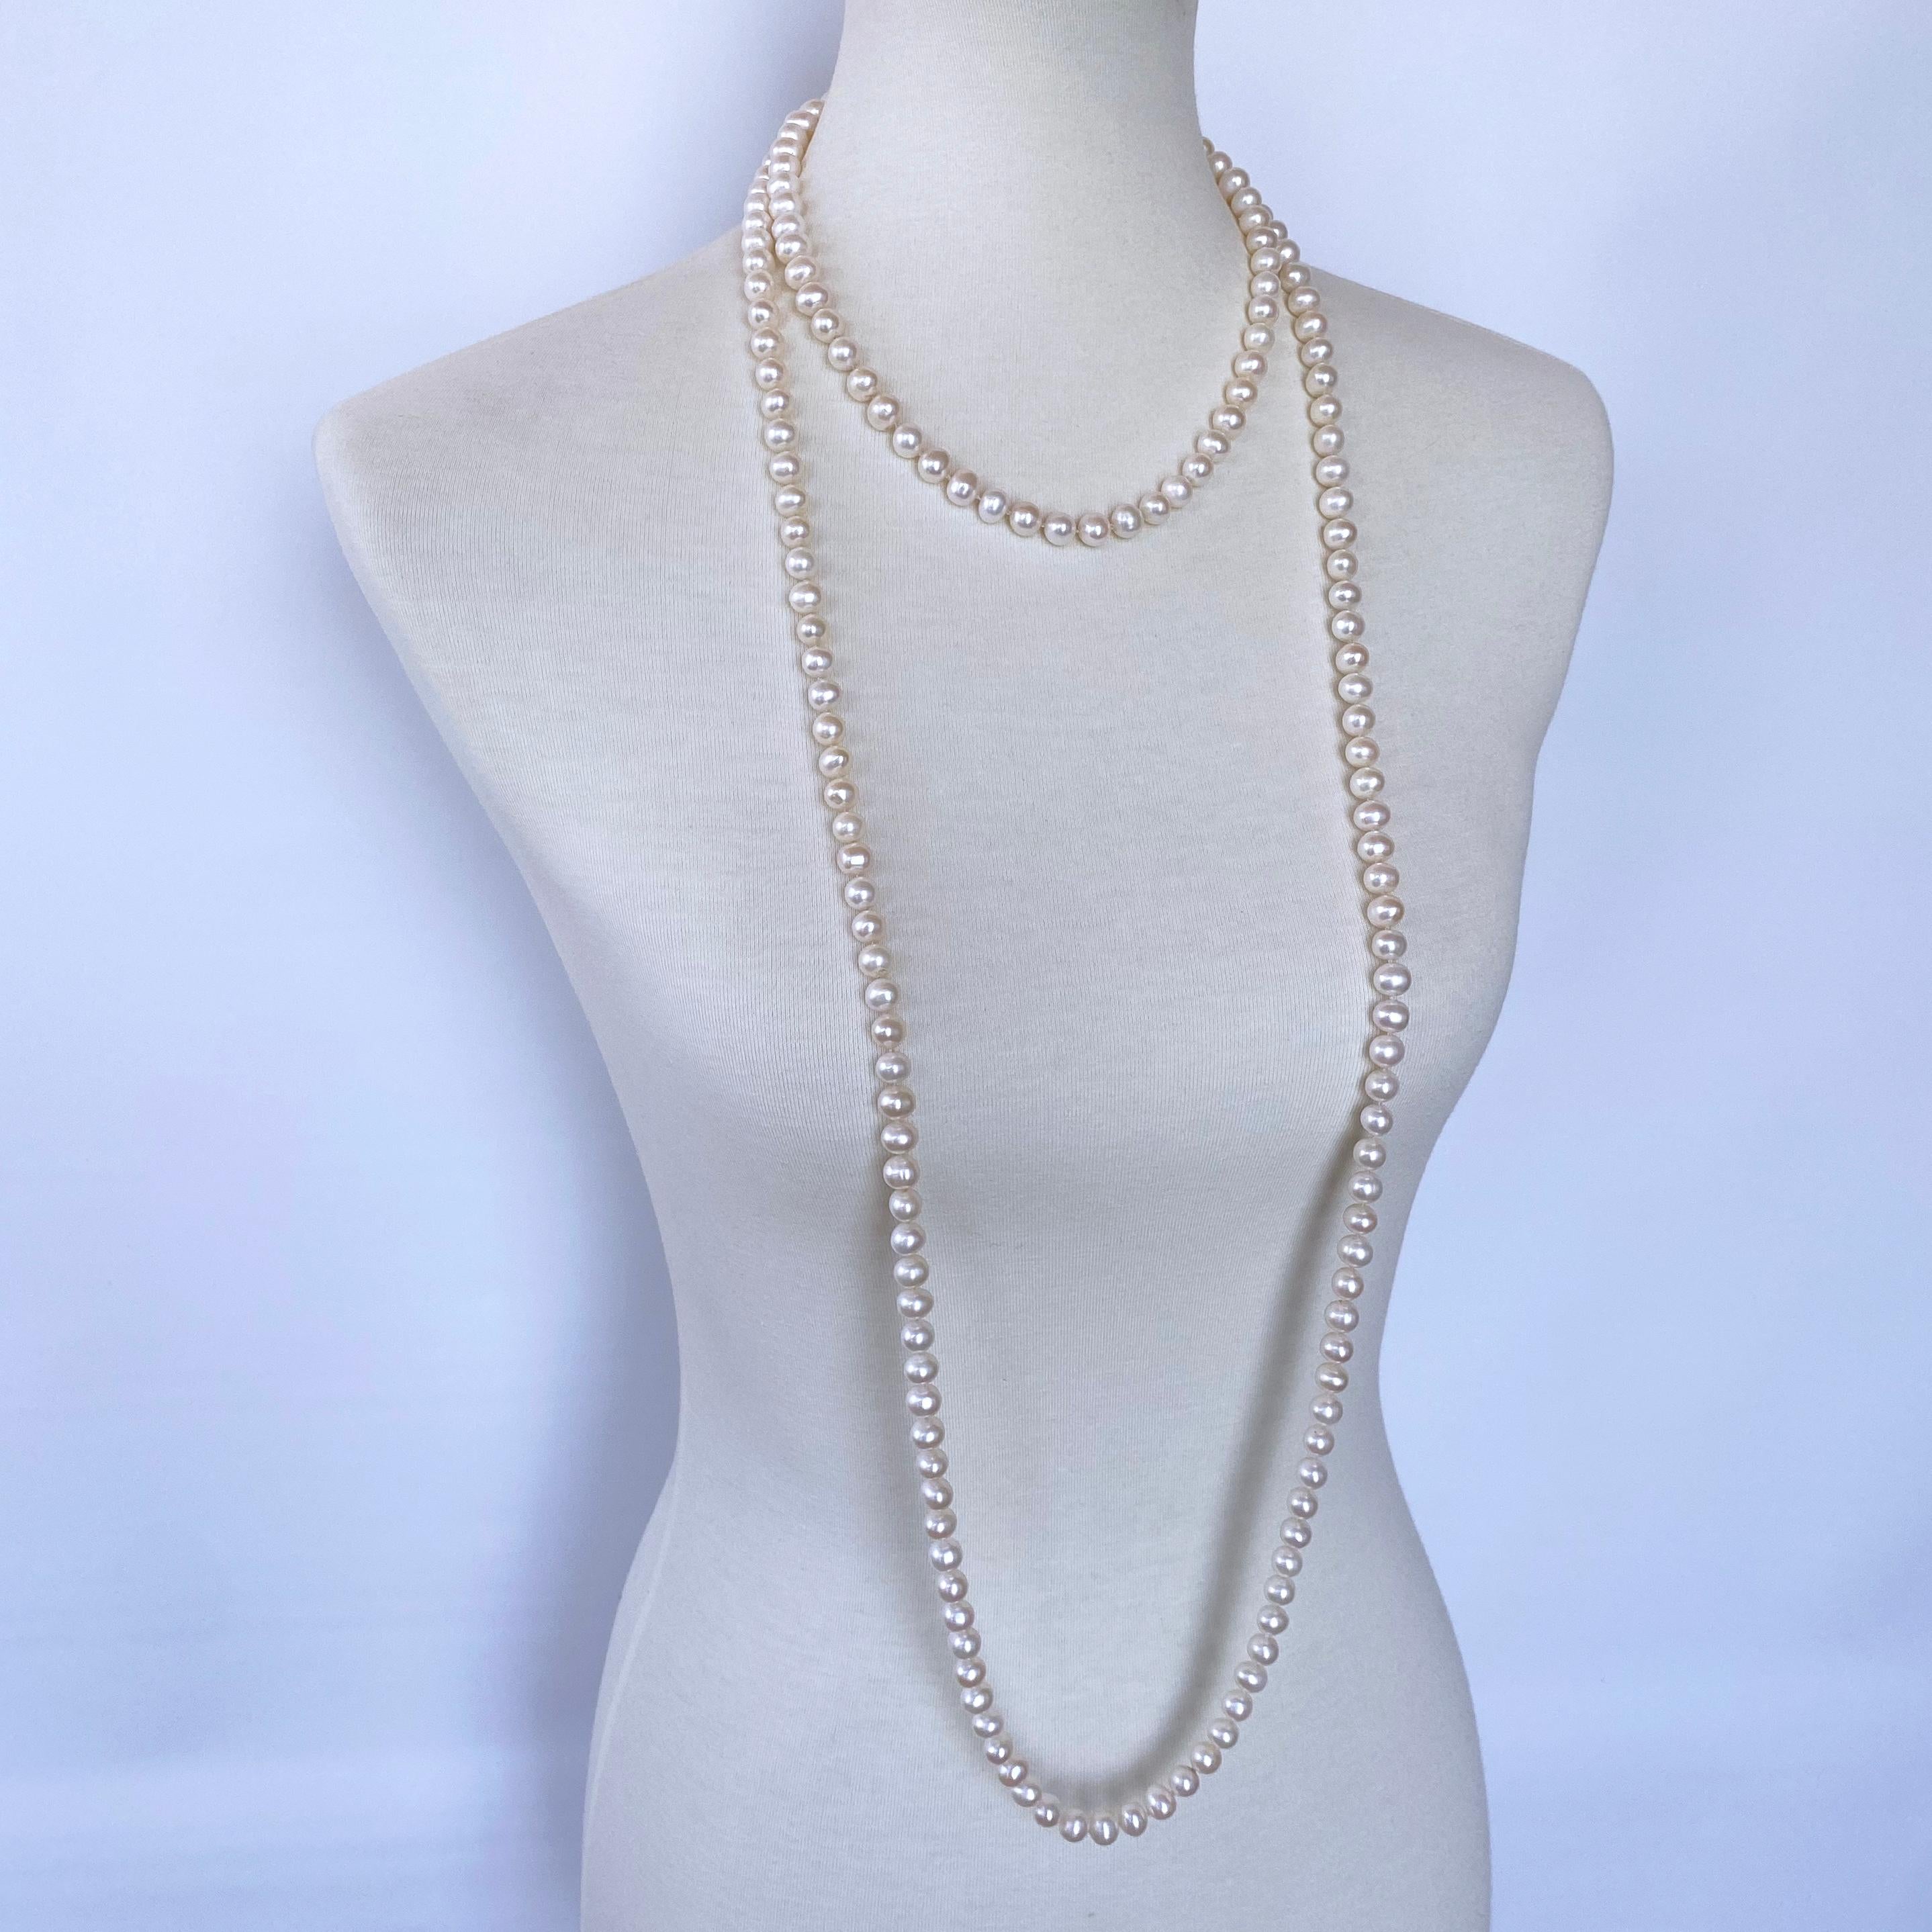 Women's or Men's Marina J. Long Pearl Knotted Necklace with 14k Yellow Gold Ball Clasp